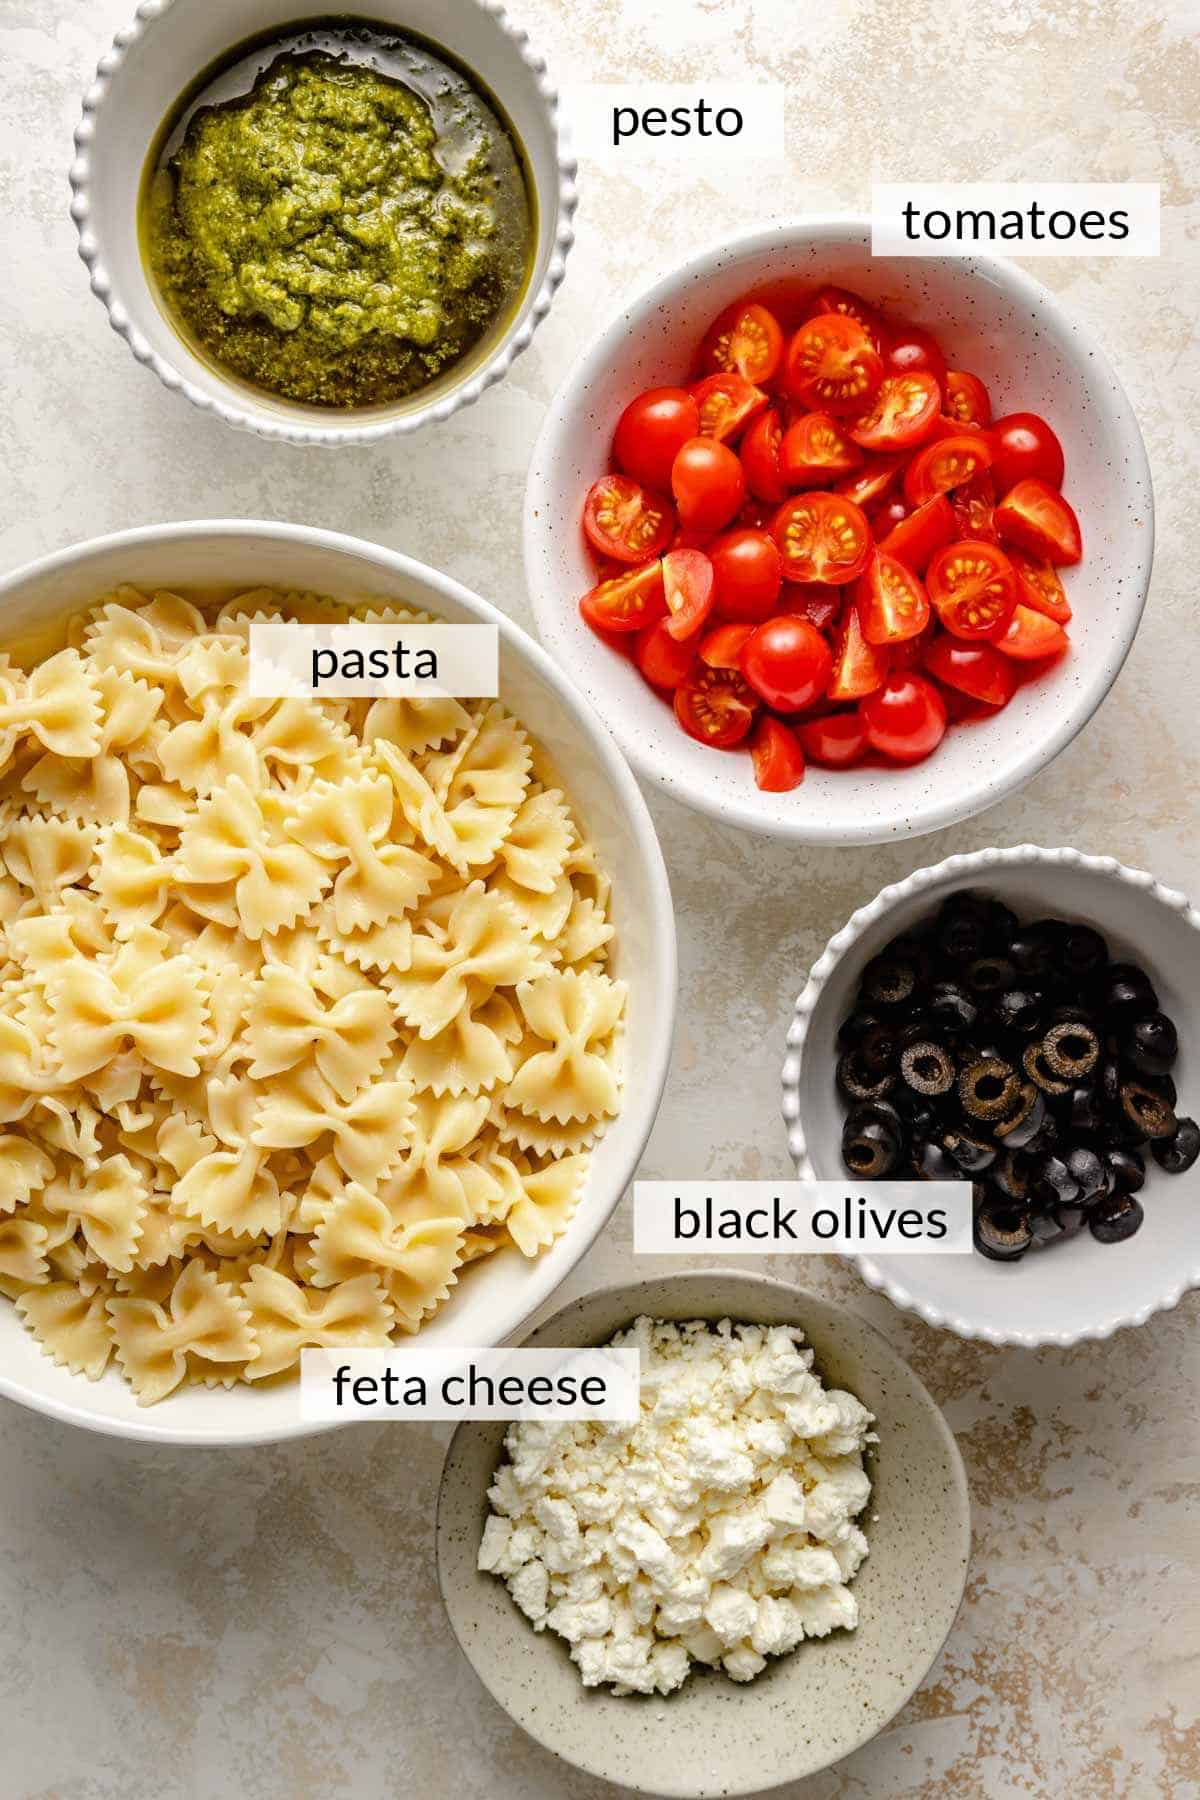 Pasta, feta cheese, black olives, cherry tomatoes and pesto divided into small bowls.